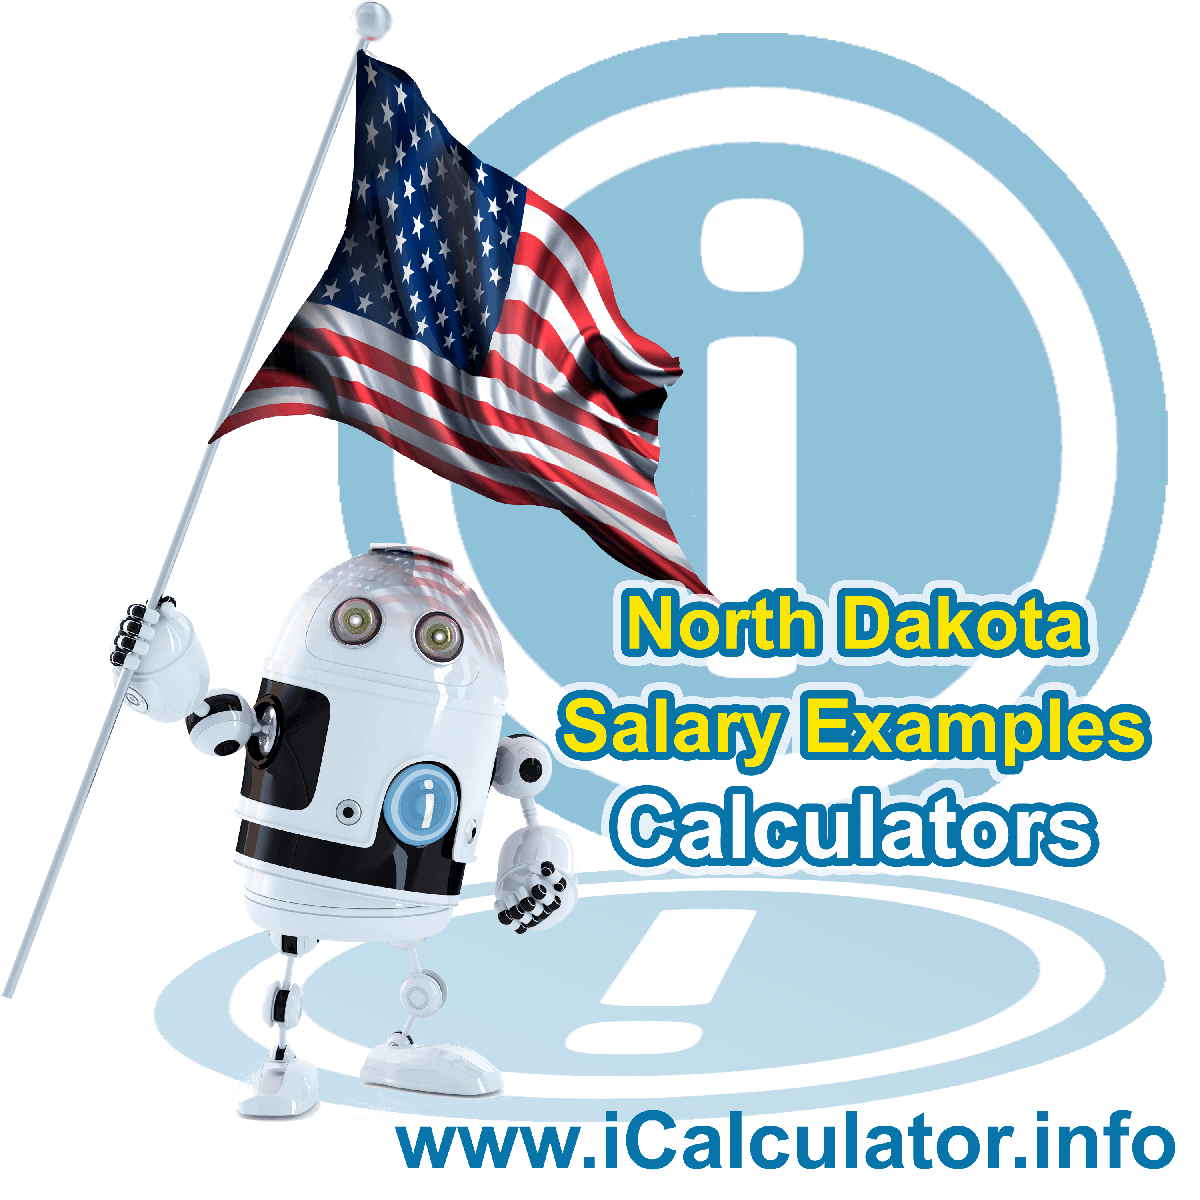 North Dakota Salary Example for $ 200,000.00 in 2023 | iCalculator™ | $ 200,000.00 salary example for employee and employer paying North Dakota State tincome taxes. Detailed salary after tax calculation including North Dakota State Tax, Federal State Tax, Medicare Deductions, Social Security, Capital Gains and other income tax and salary deductions complete with supporting North Dakota state tax tables 